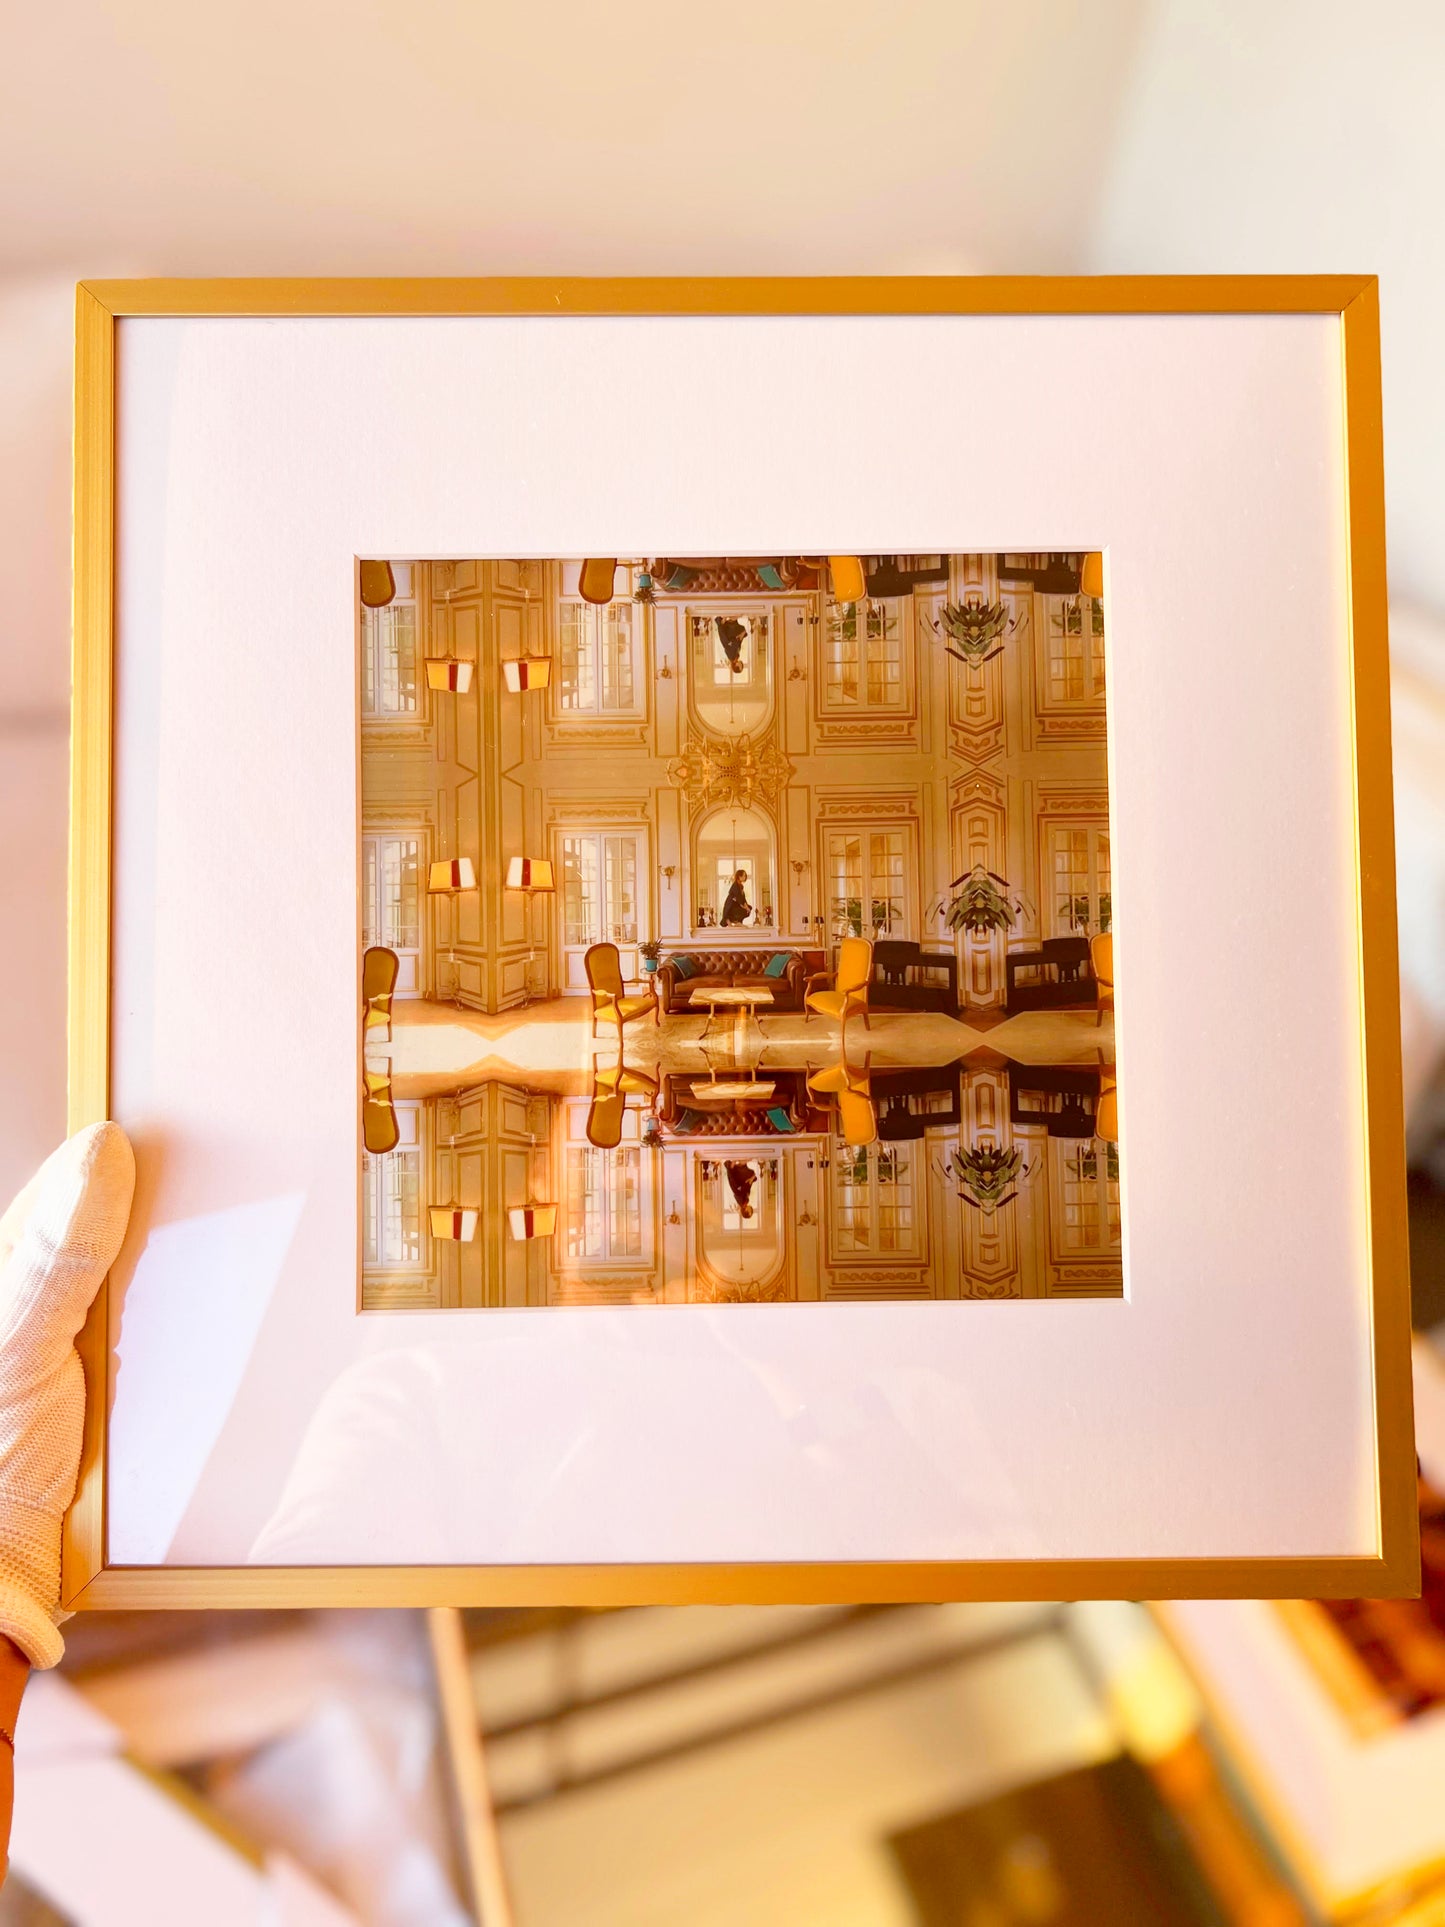 ASCENSIO: The Everlasting Temple | Limited Edition Square Framed 44 + 2 AP